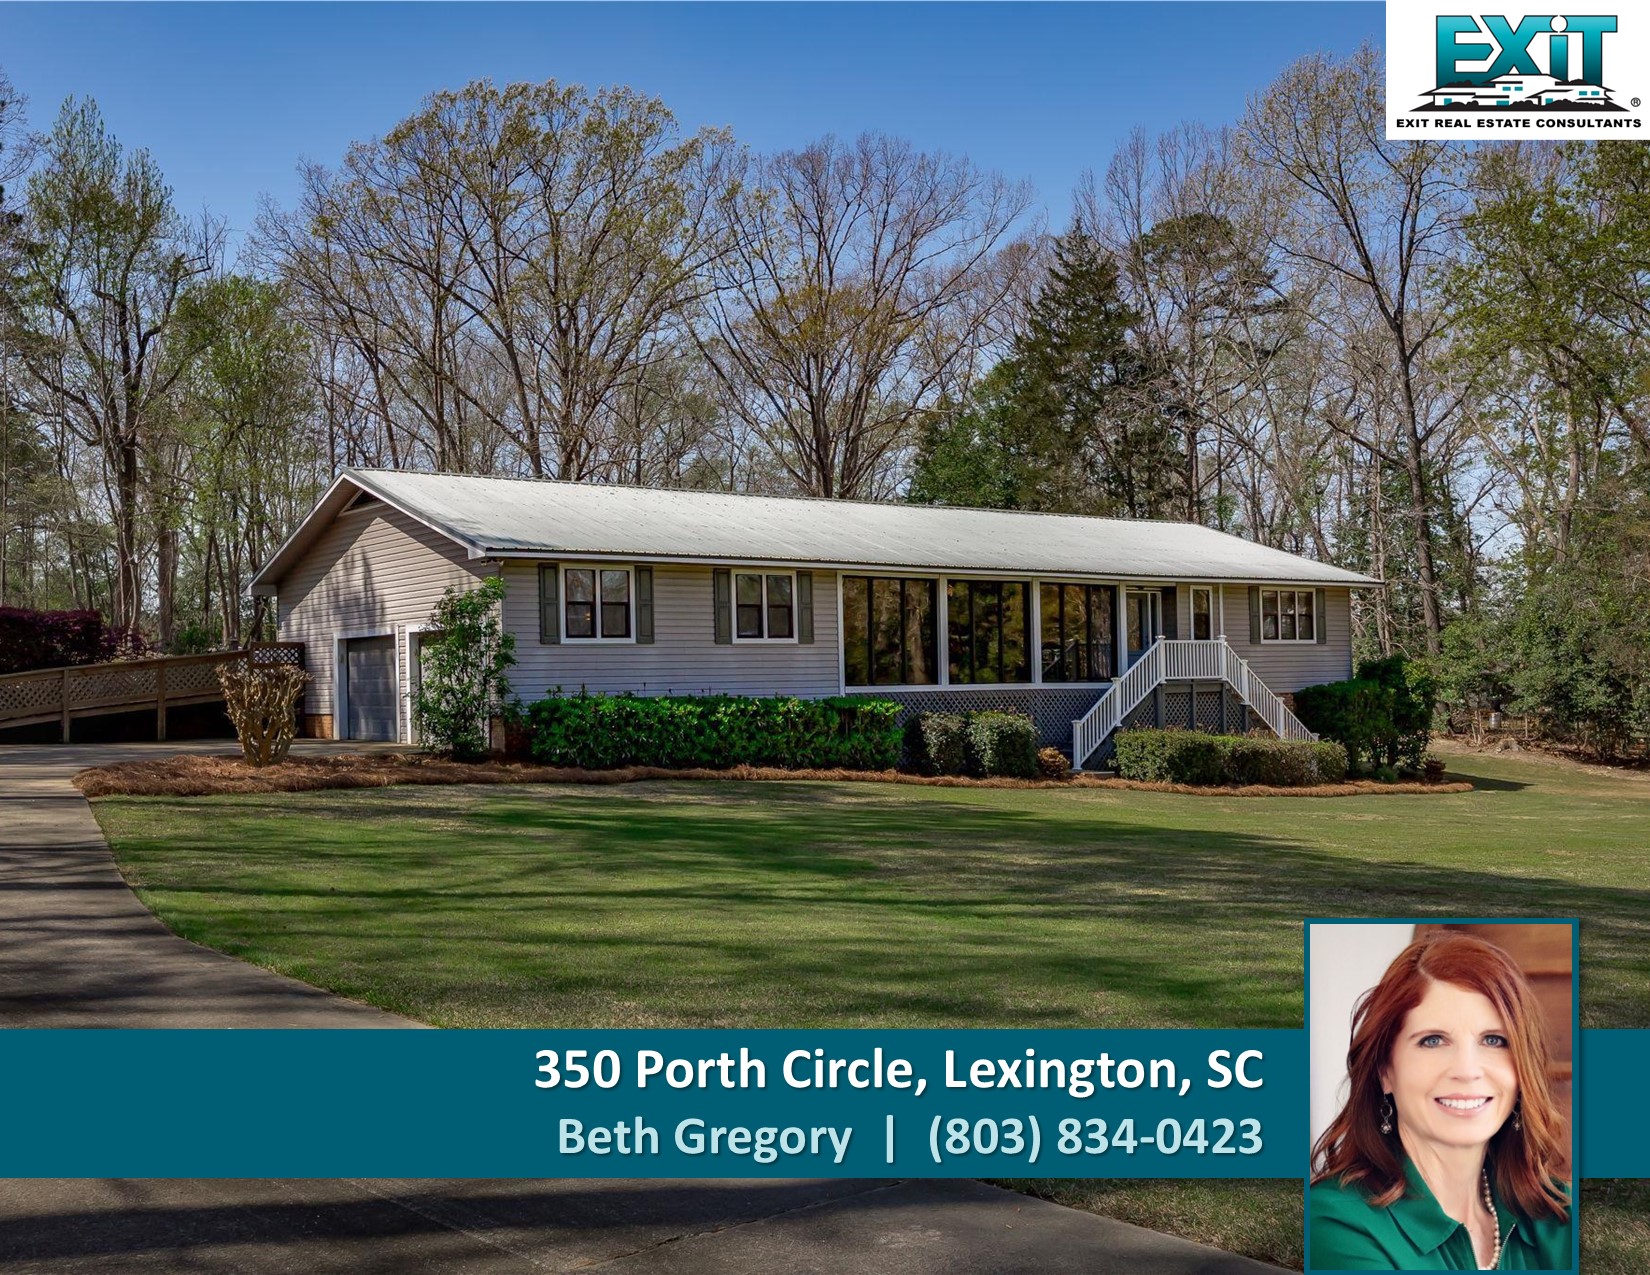 Just listed in Lexington